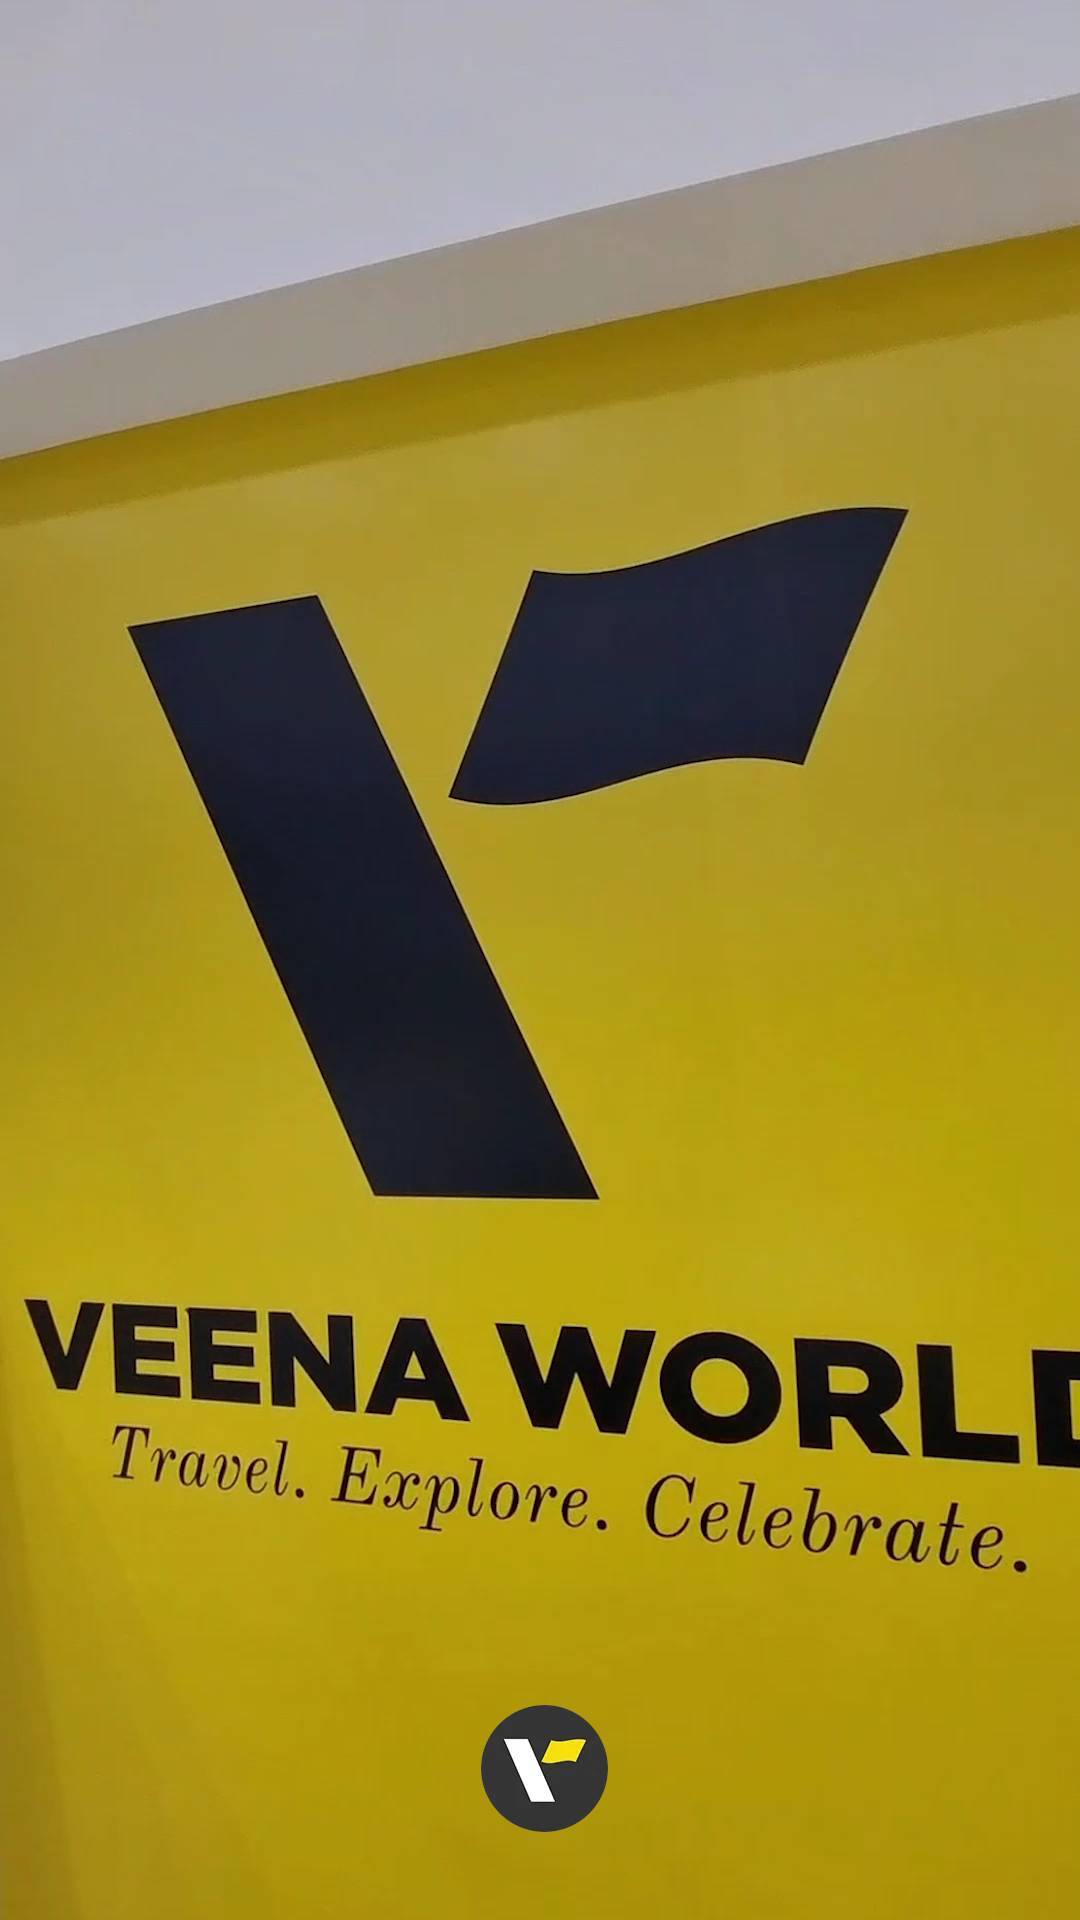 Let us make your travel dreams come true. Our team at Malad is here to assist you. We look forward to meeting you soon.#NewOffice #Malad#VeenaWorld